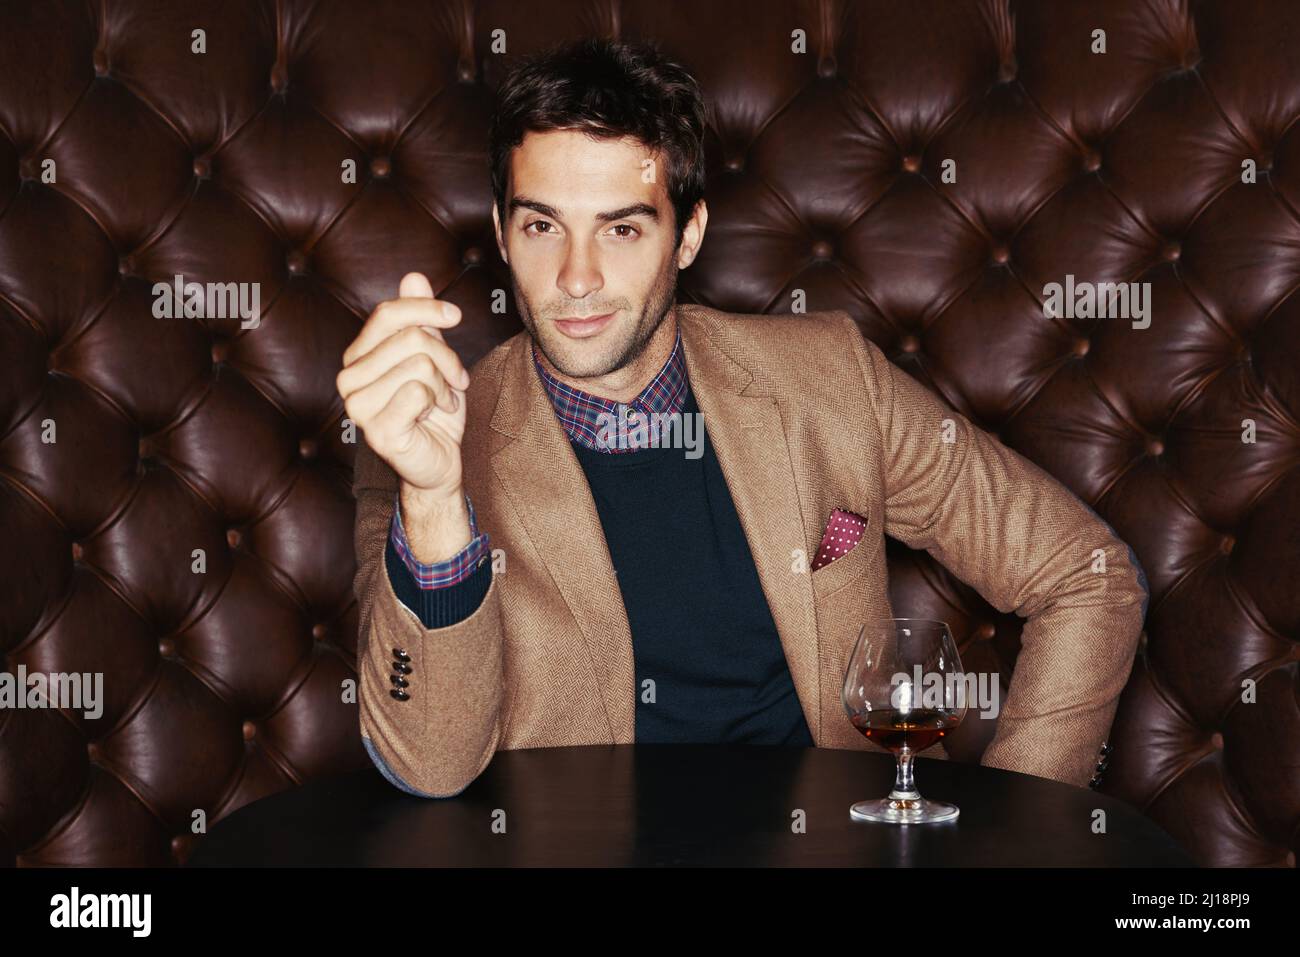 Enjoying the finer things. Portrait of a handsome young man drinking in a club. Stock Photo